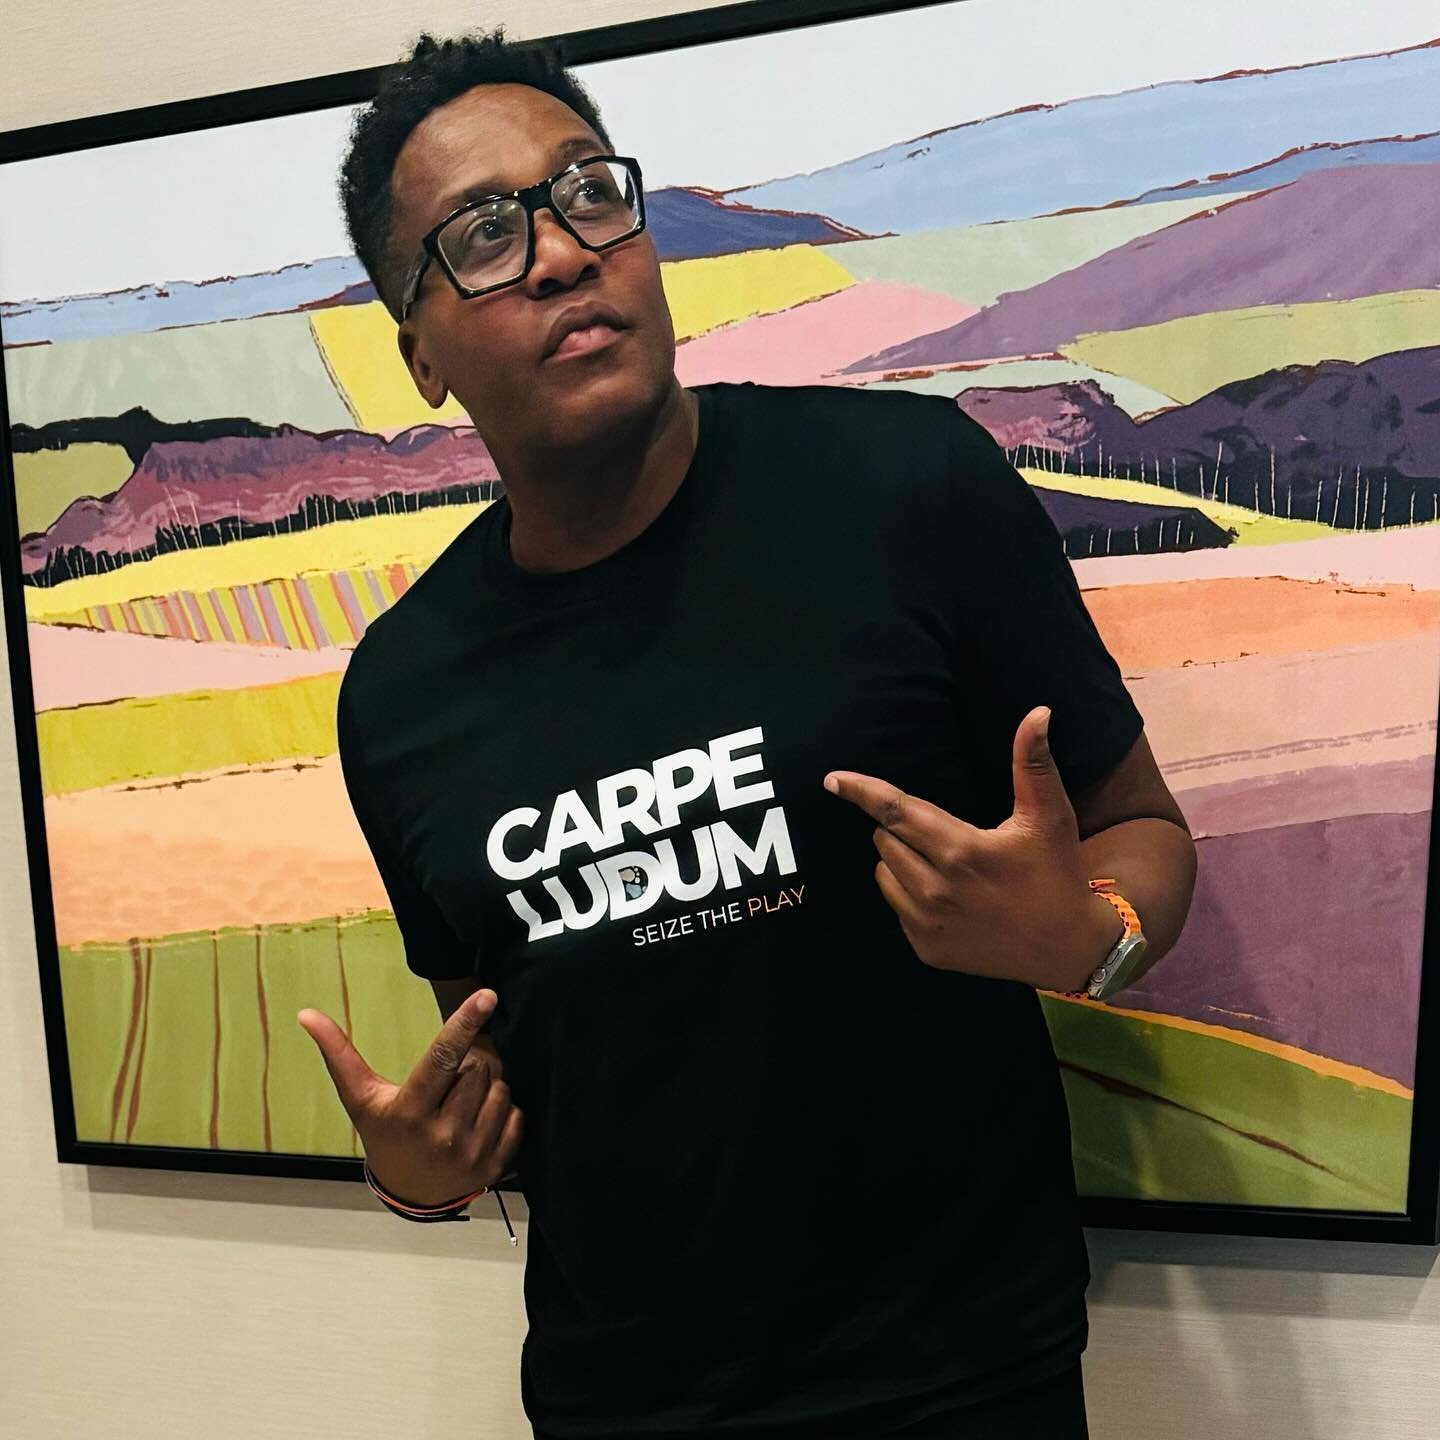 Sometimes you have to seize the play! Carpe Ludum. 🌟 Let&rsquo;s make every moment count with joy and laughter! 

#LivePlayfully #SeizeTheDay #darryledwards #primalplaymethod&reg;️ #newtshirtdesign